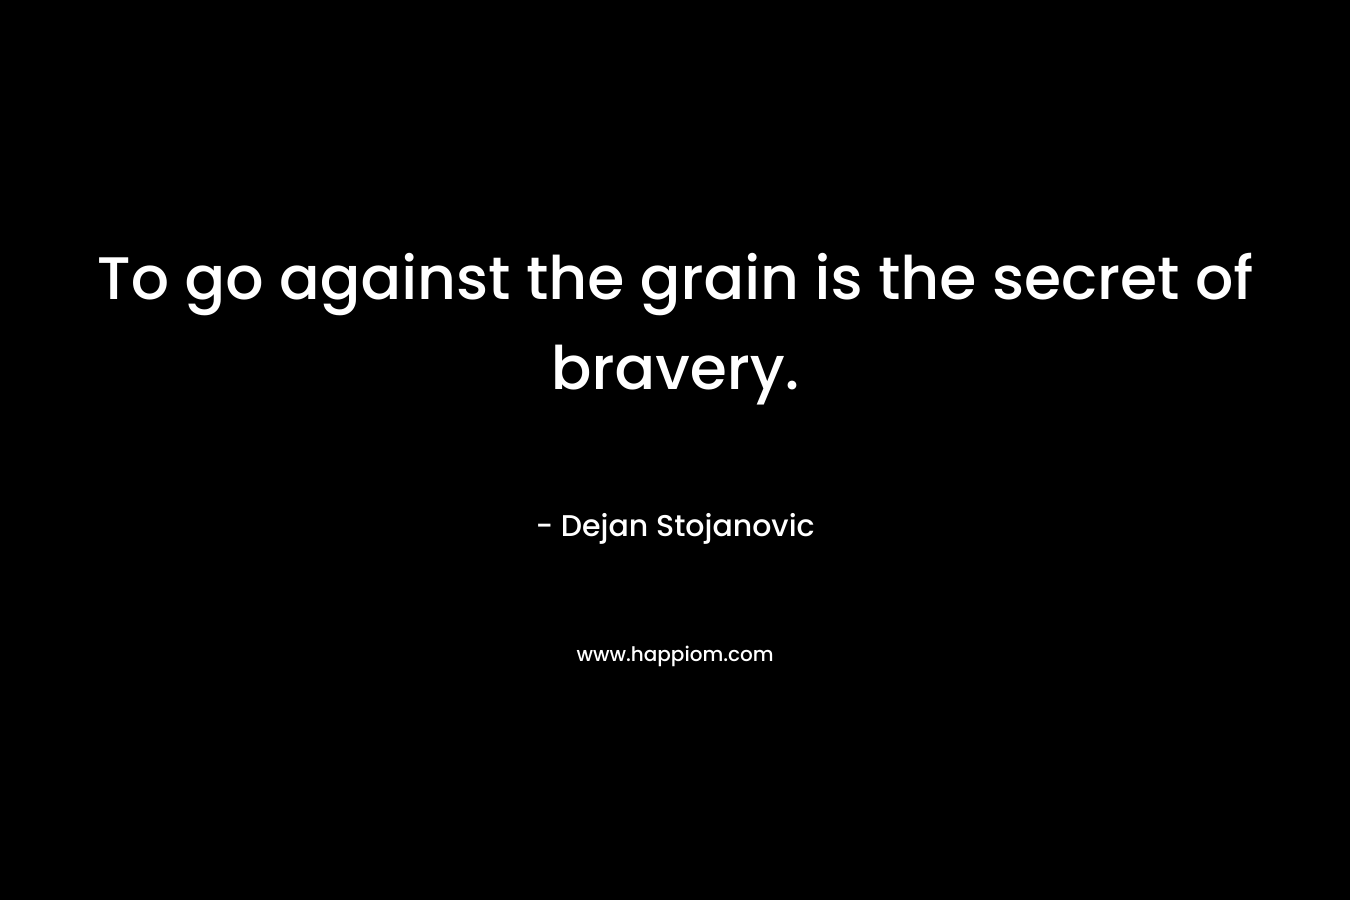 To go against the grain is the secret of bravery.